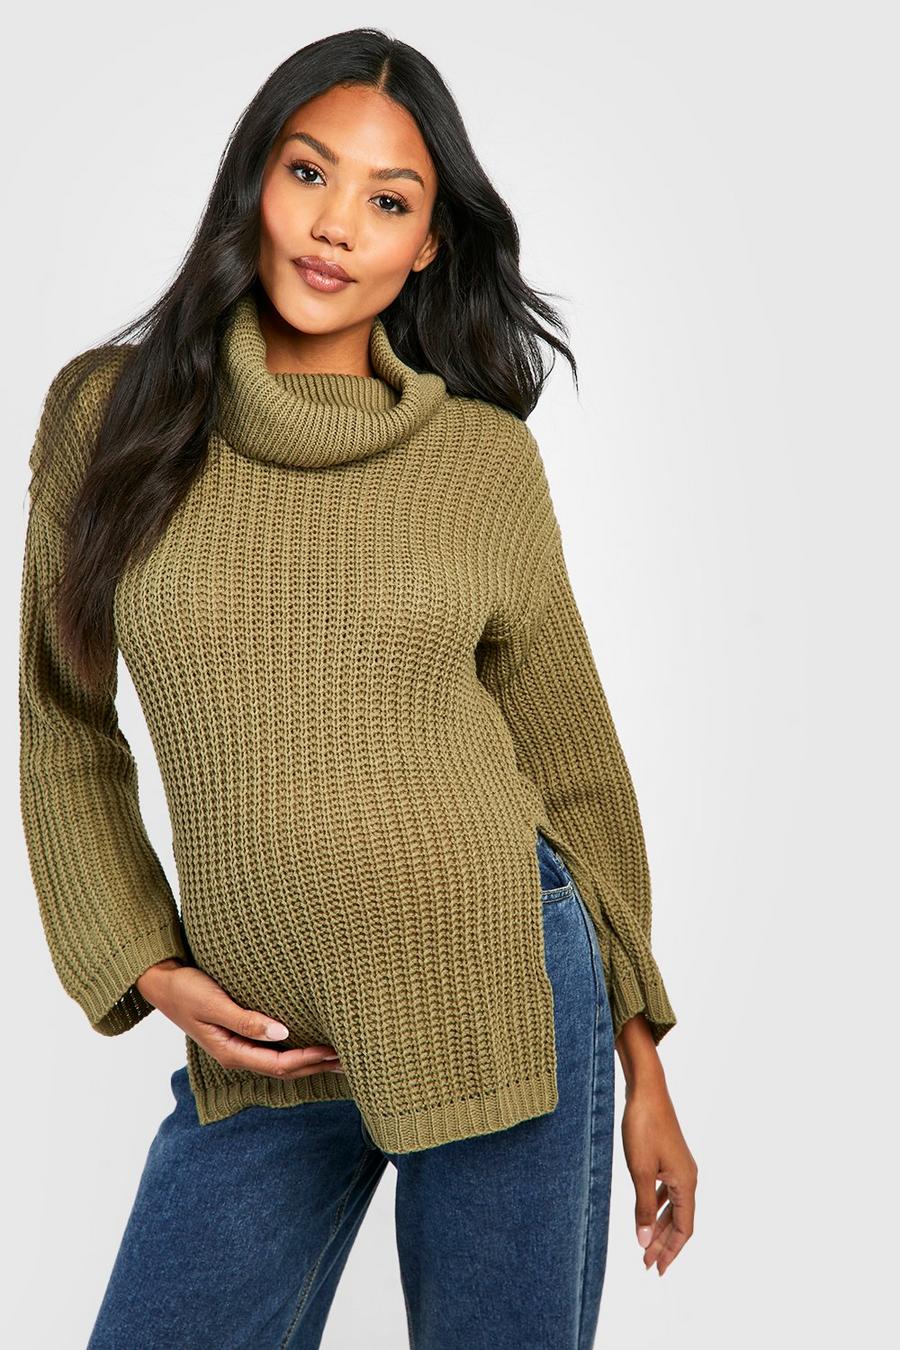 Olive green Maternity Slouchy Cowl Neck Sweater